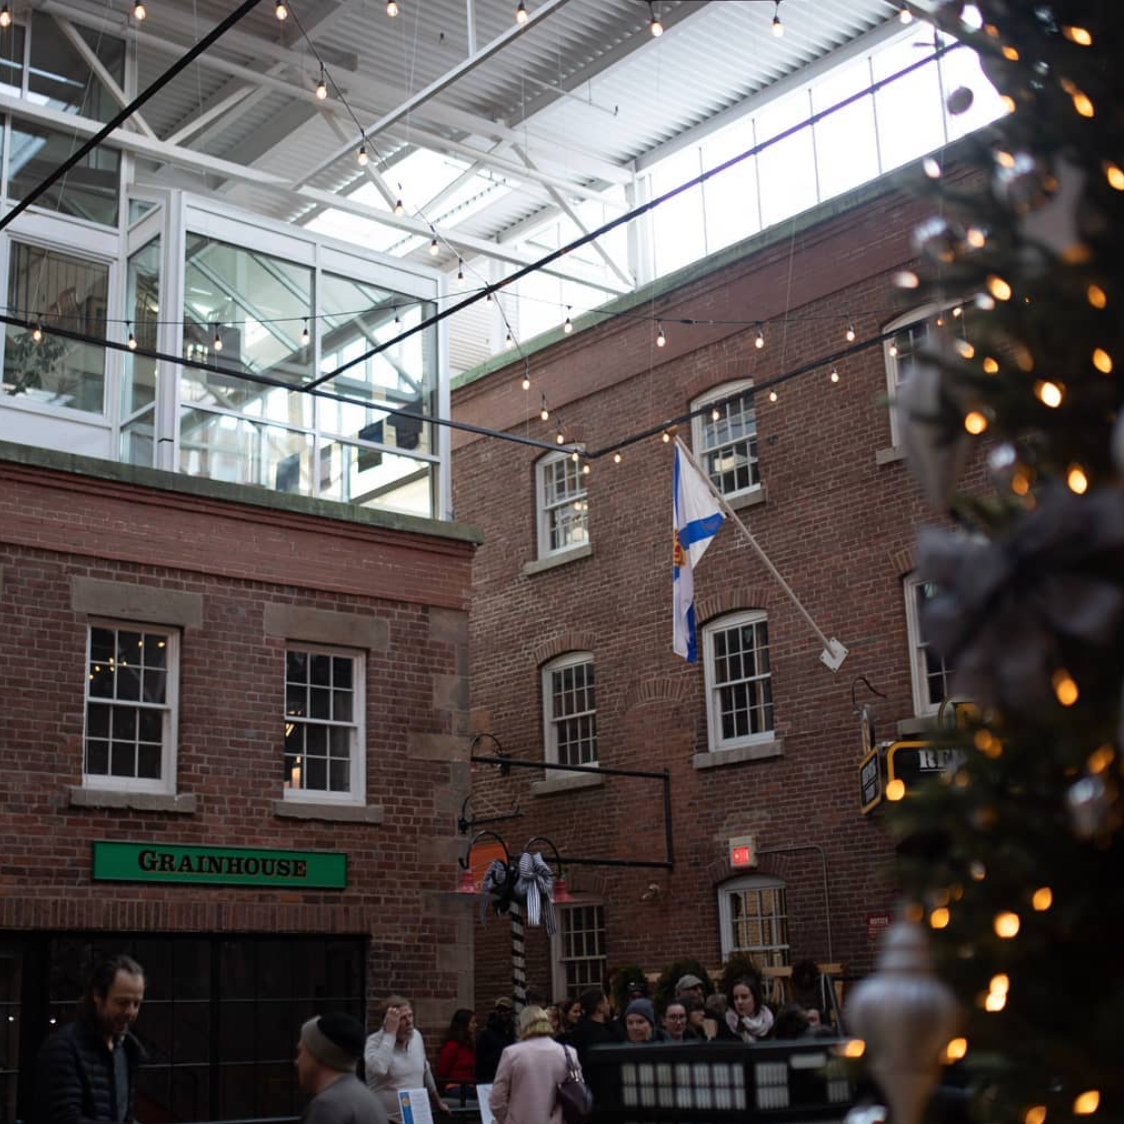 A large, open courtyard with brick walls and string lights